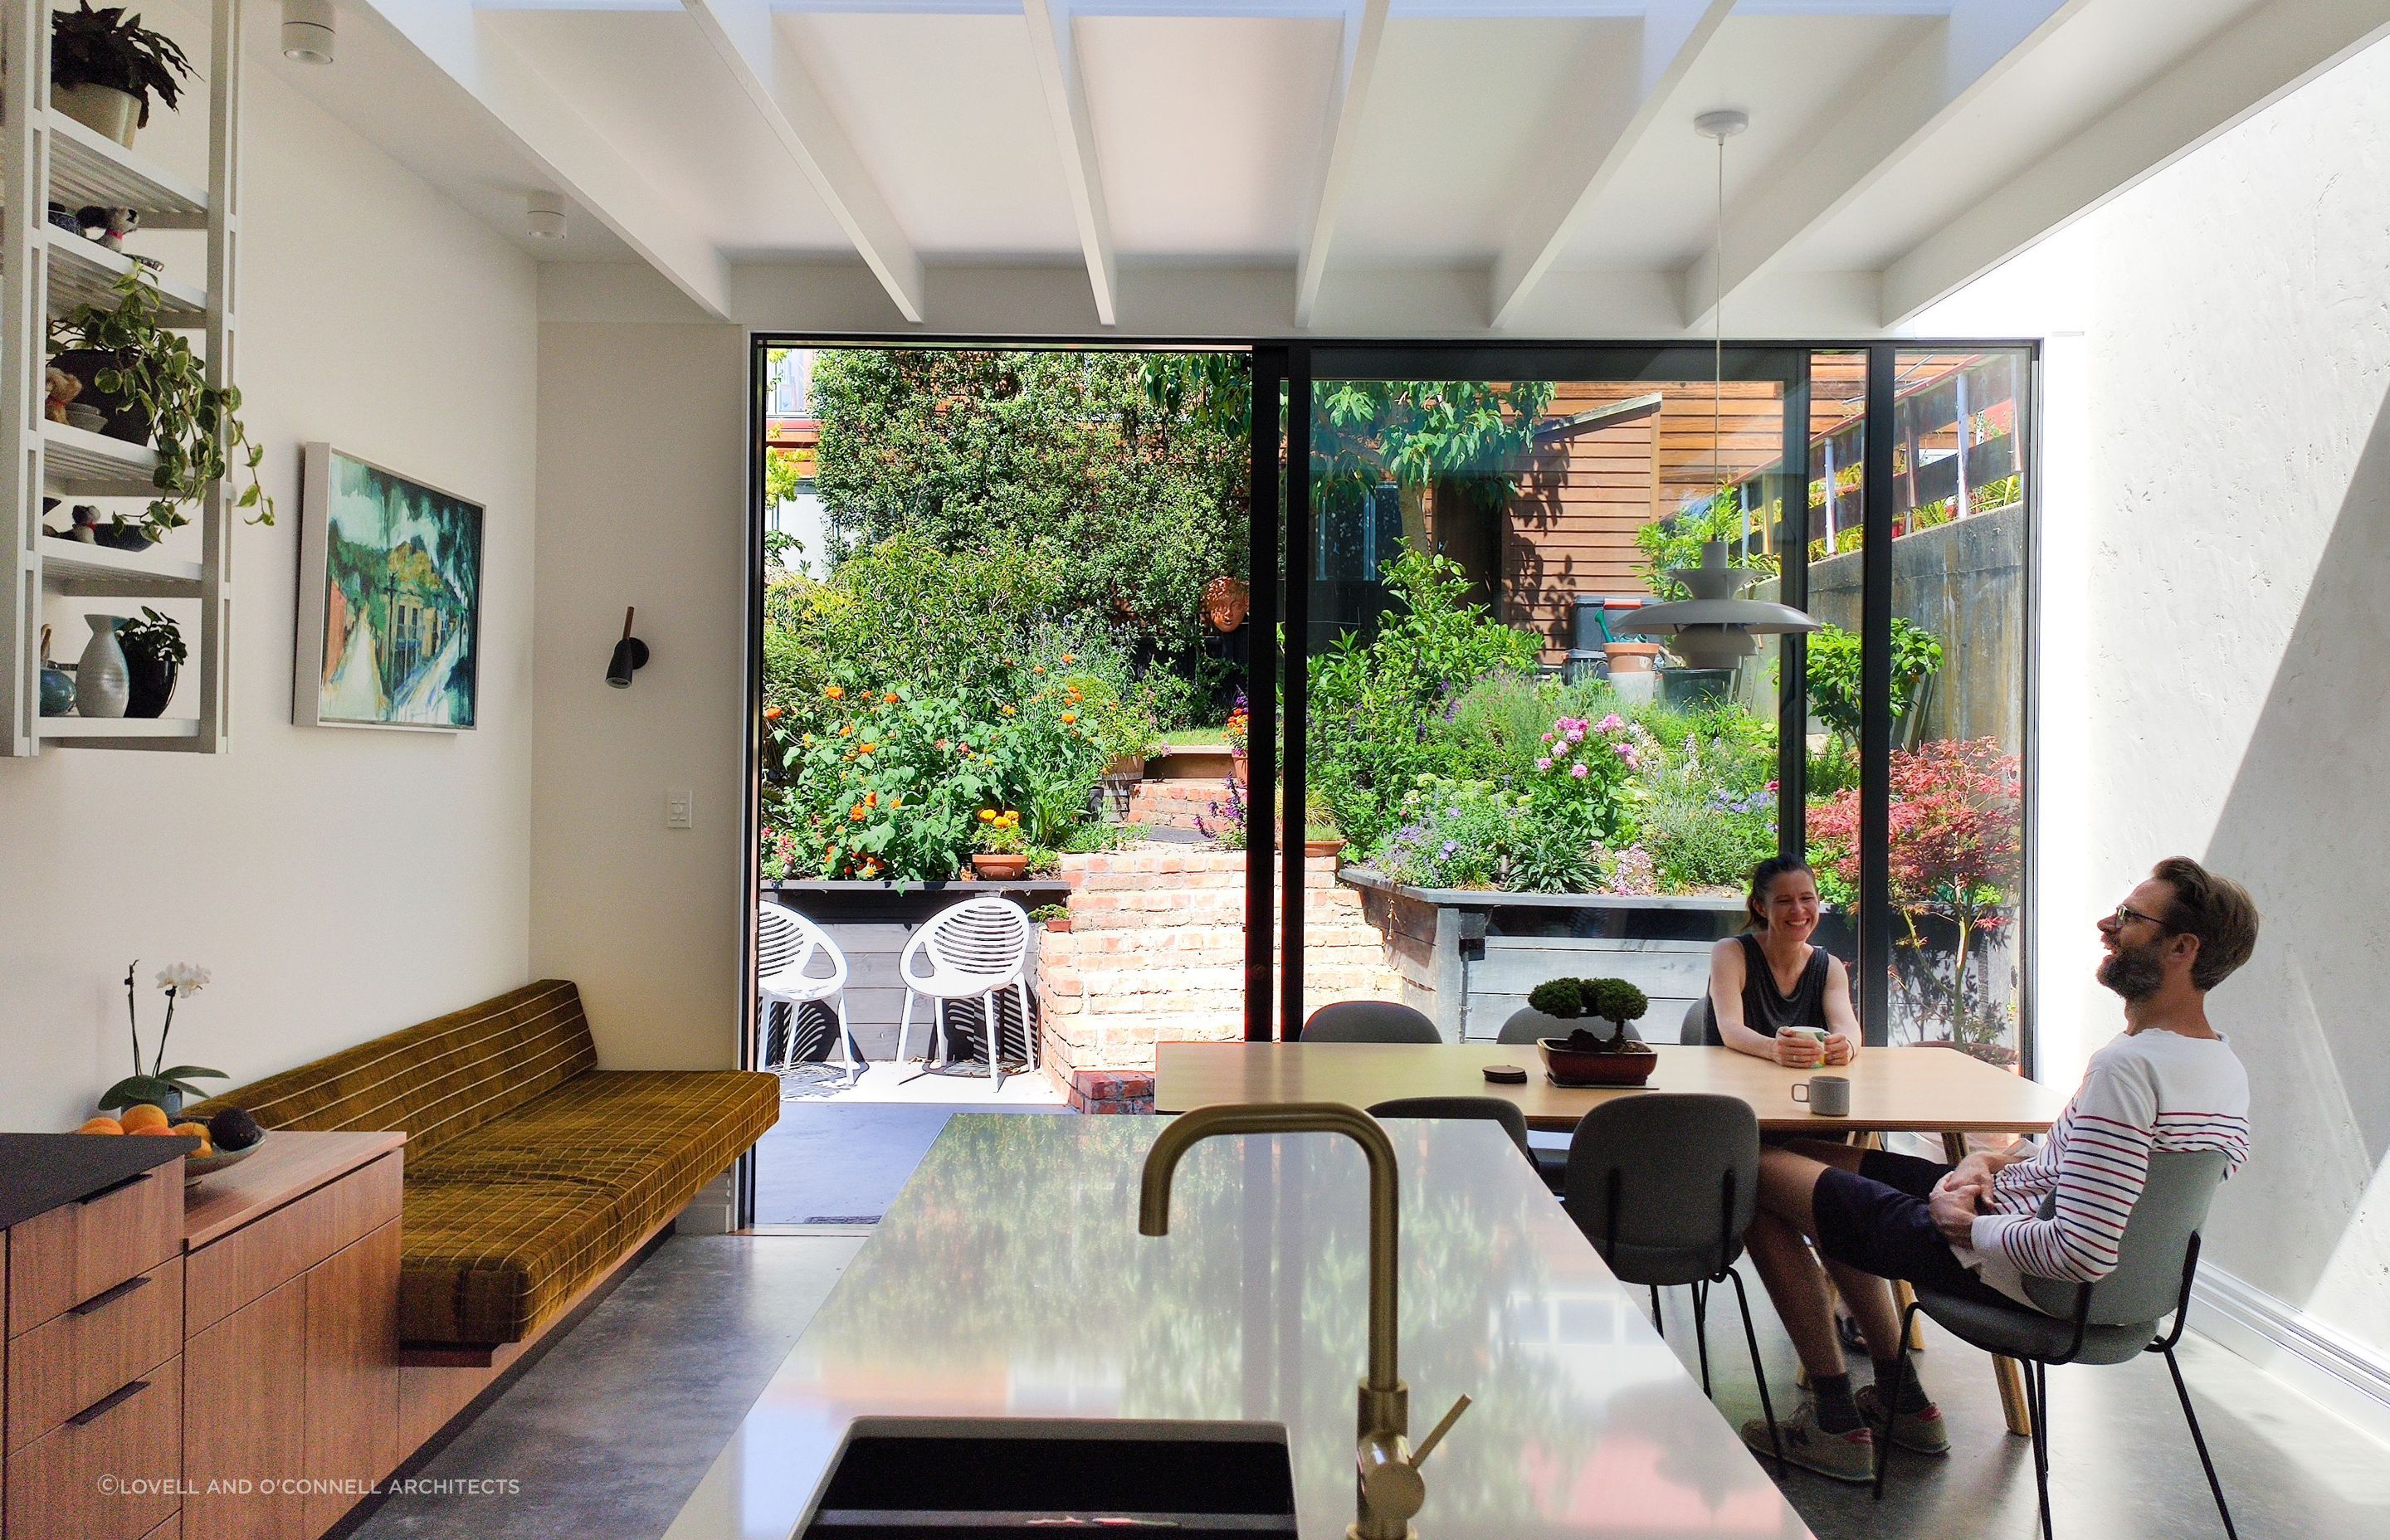 Fantastic interior design allows this lush back-garden courtyard to act as an extended dining and living space